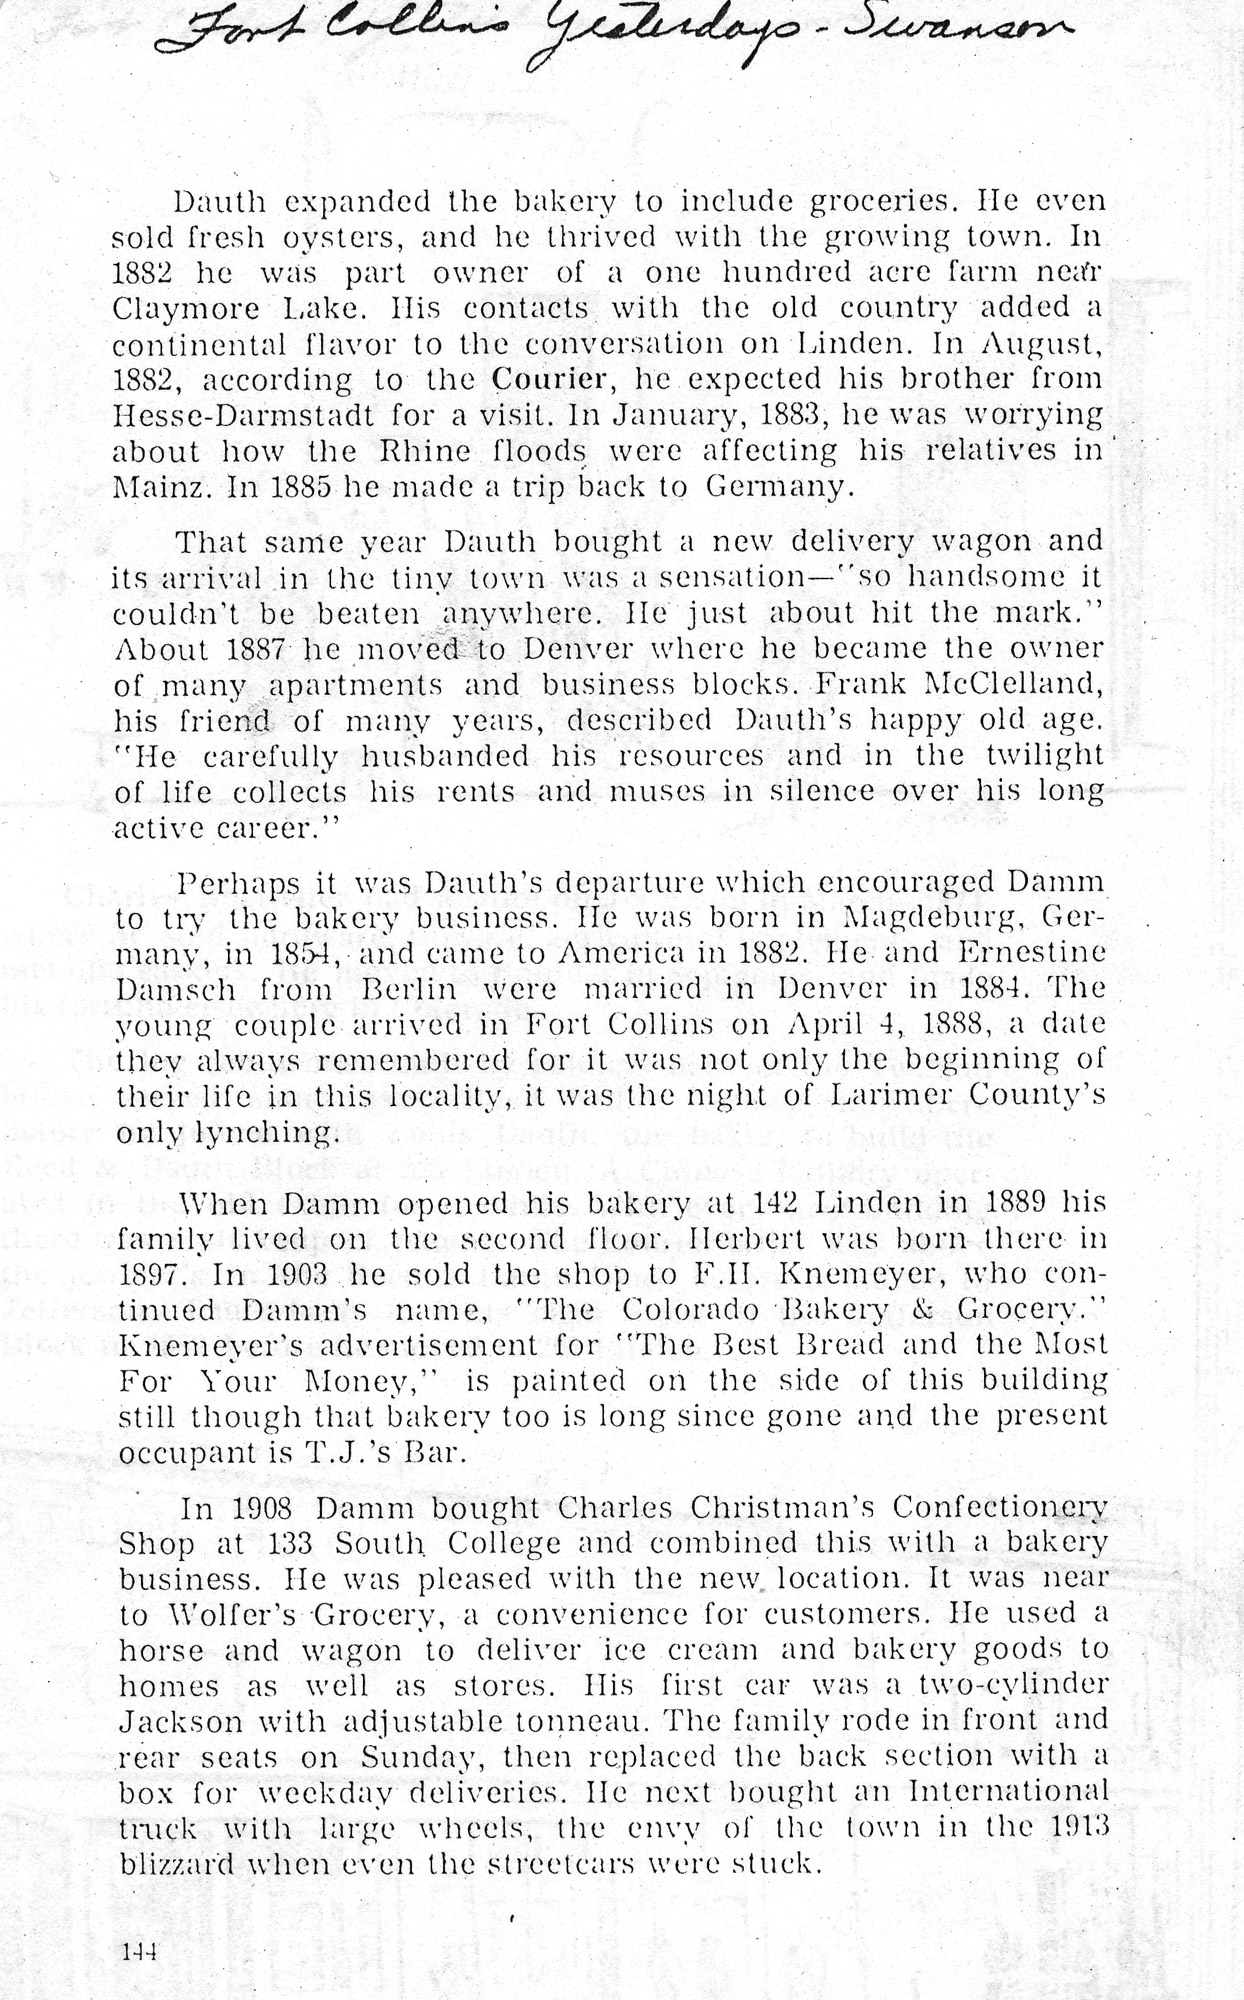 Dauth Family Archive - 1975 - Fort Collins Yesterdays - Page 143 - Detailed Life Story of Louis Dauth